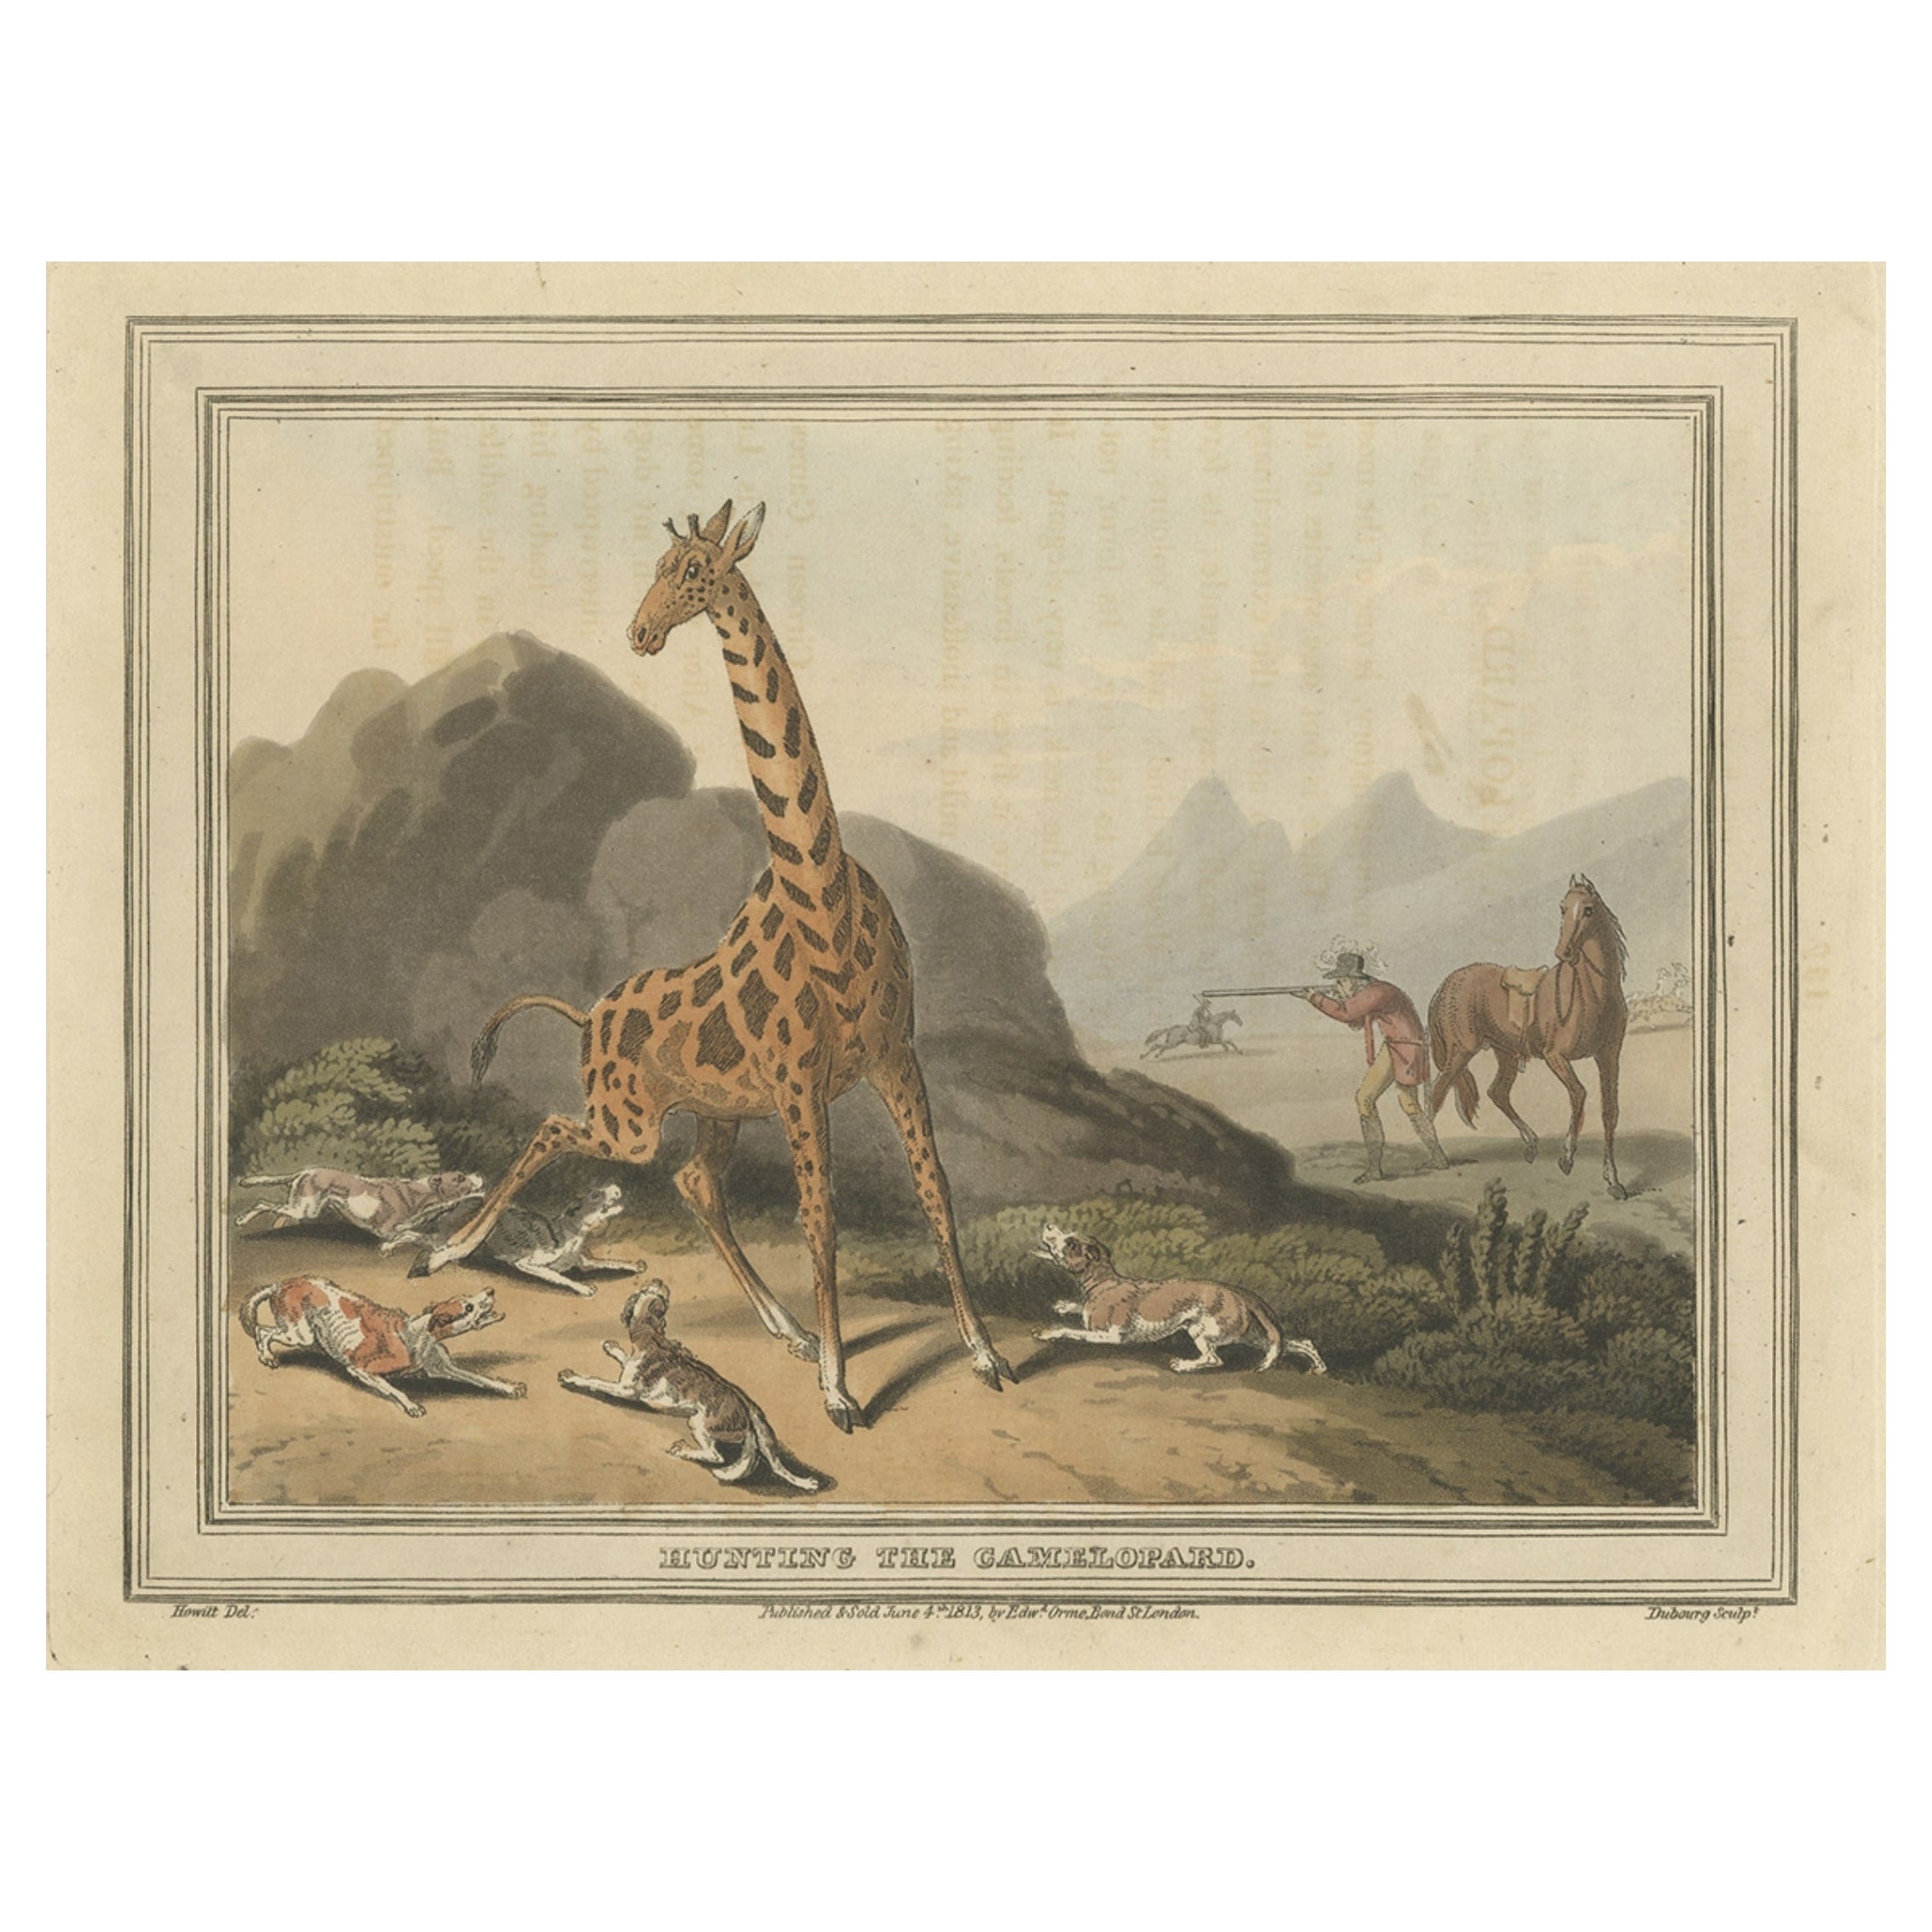 Antique Hand-Colored Print of Giraffe Hunting, 1813